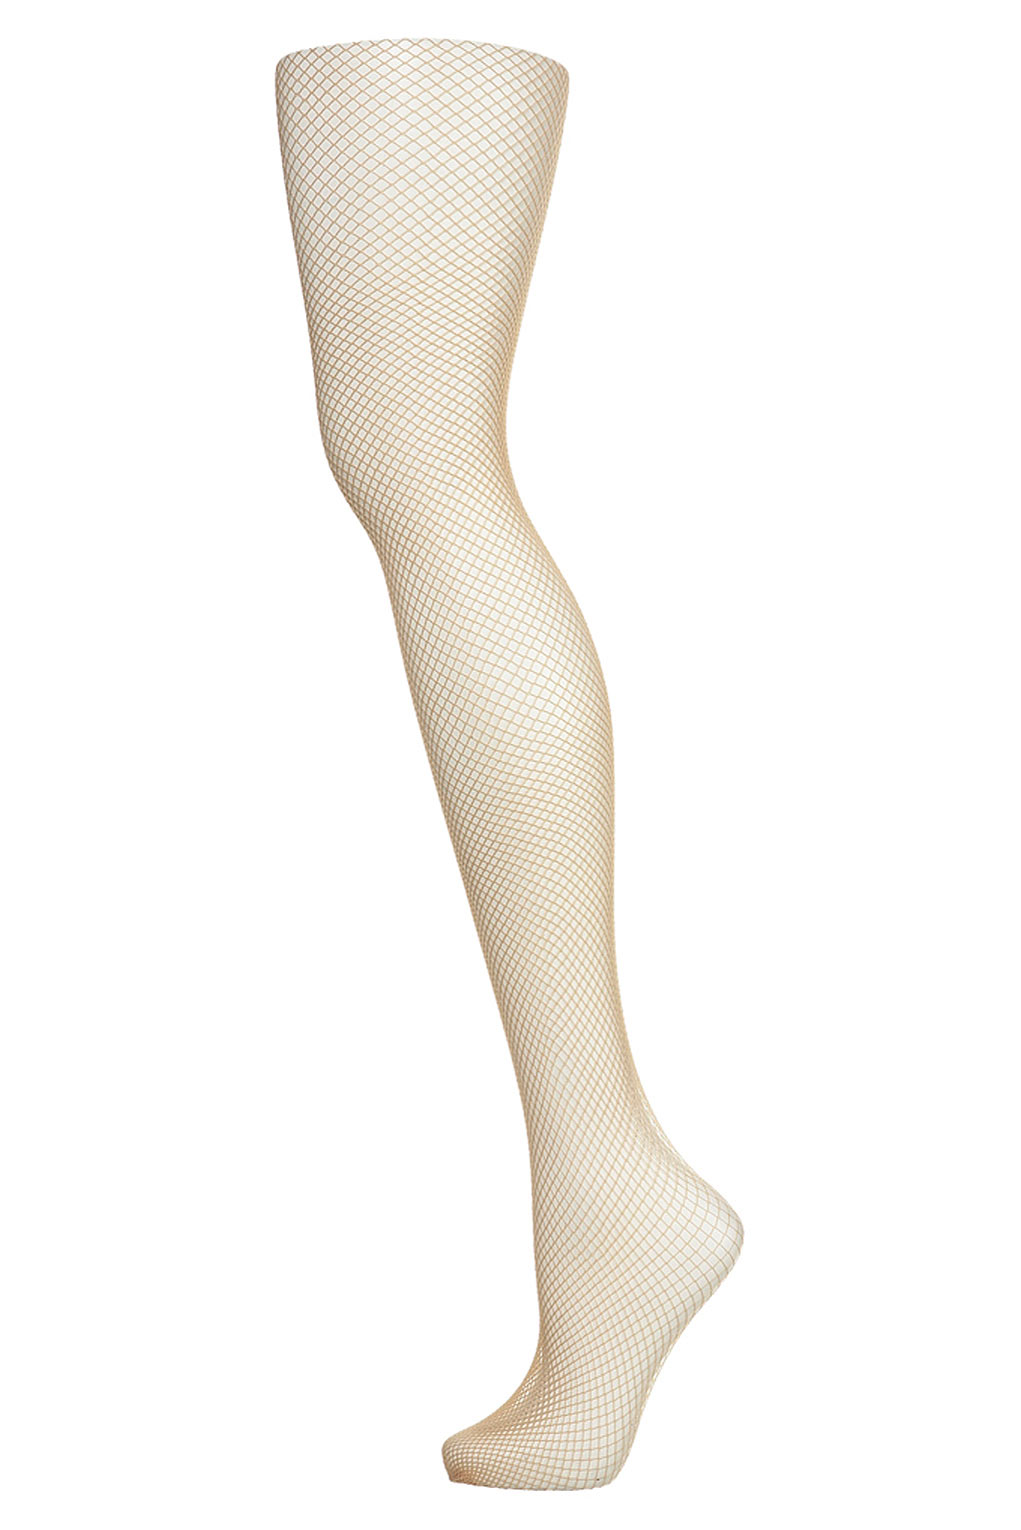 Topshop Fishnet Two Tone Tights in Beige (natural) | Lyst